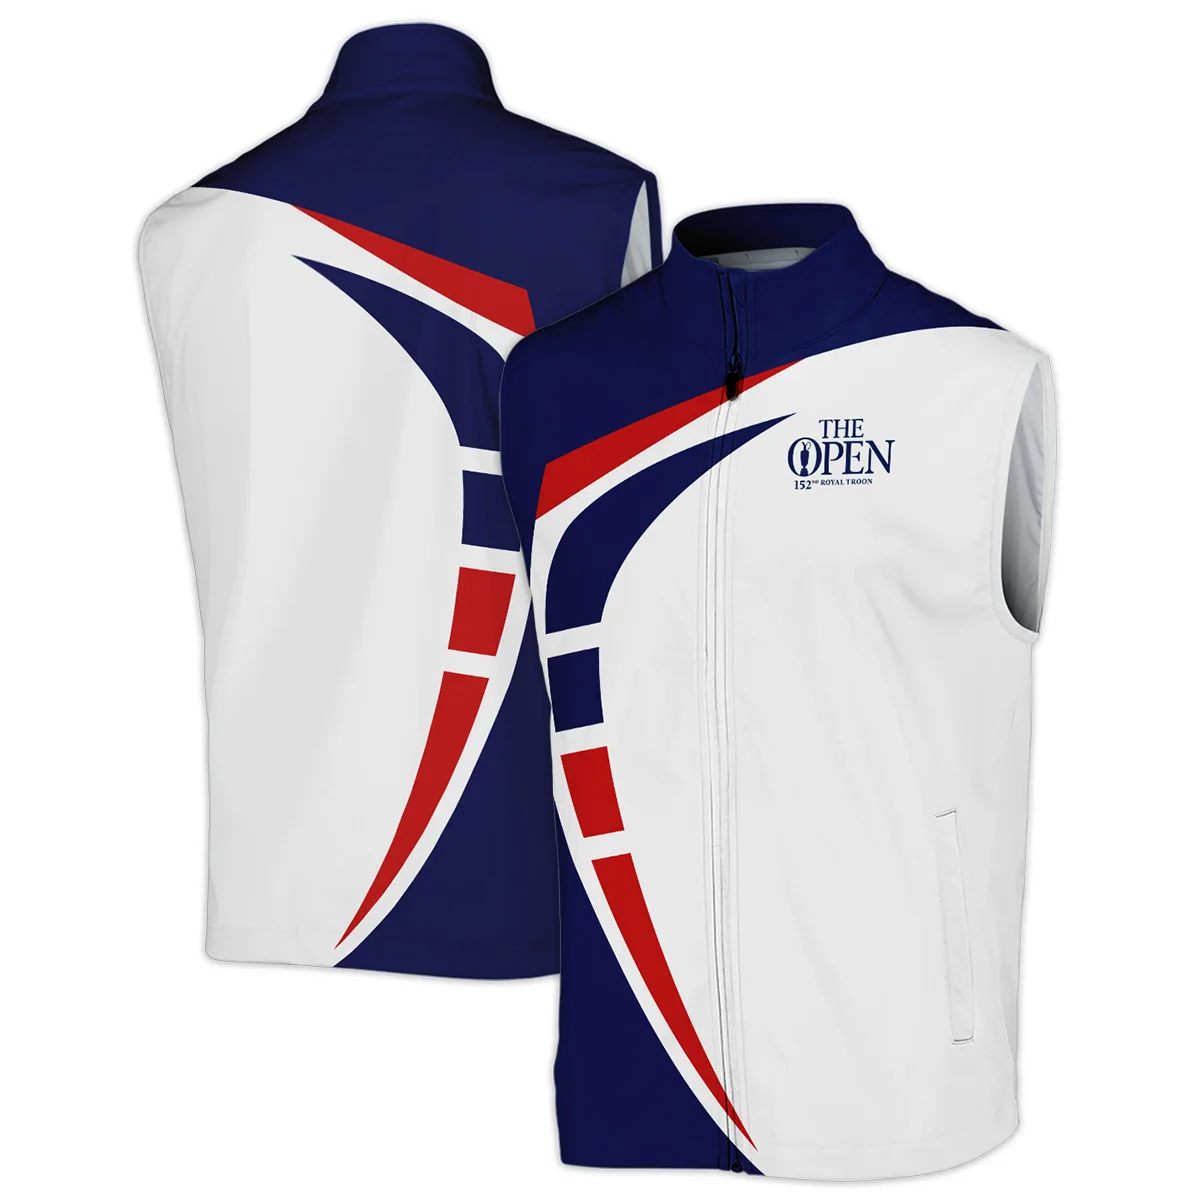 152nd Open Championship Titleist White Blue Red Pattern Background Performance Quarter Zip Sweatshirt With Pockets All Over Prints HOTOP270624A03TLTS